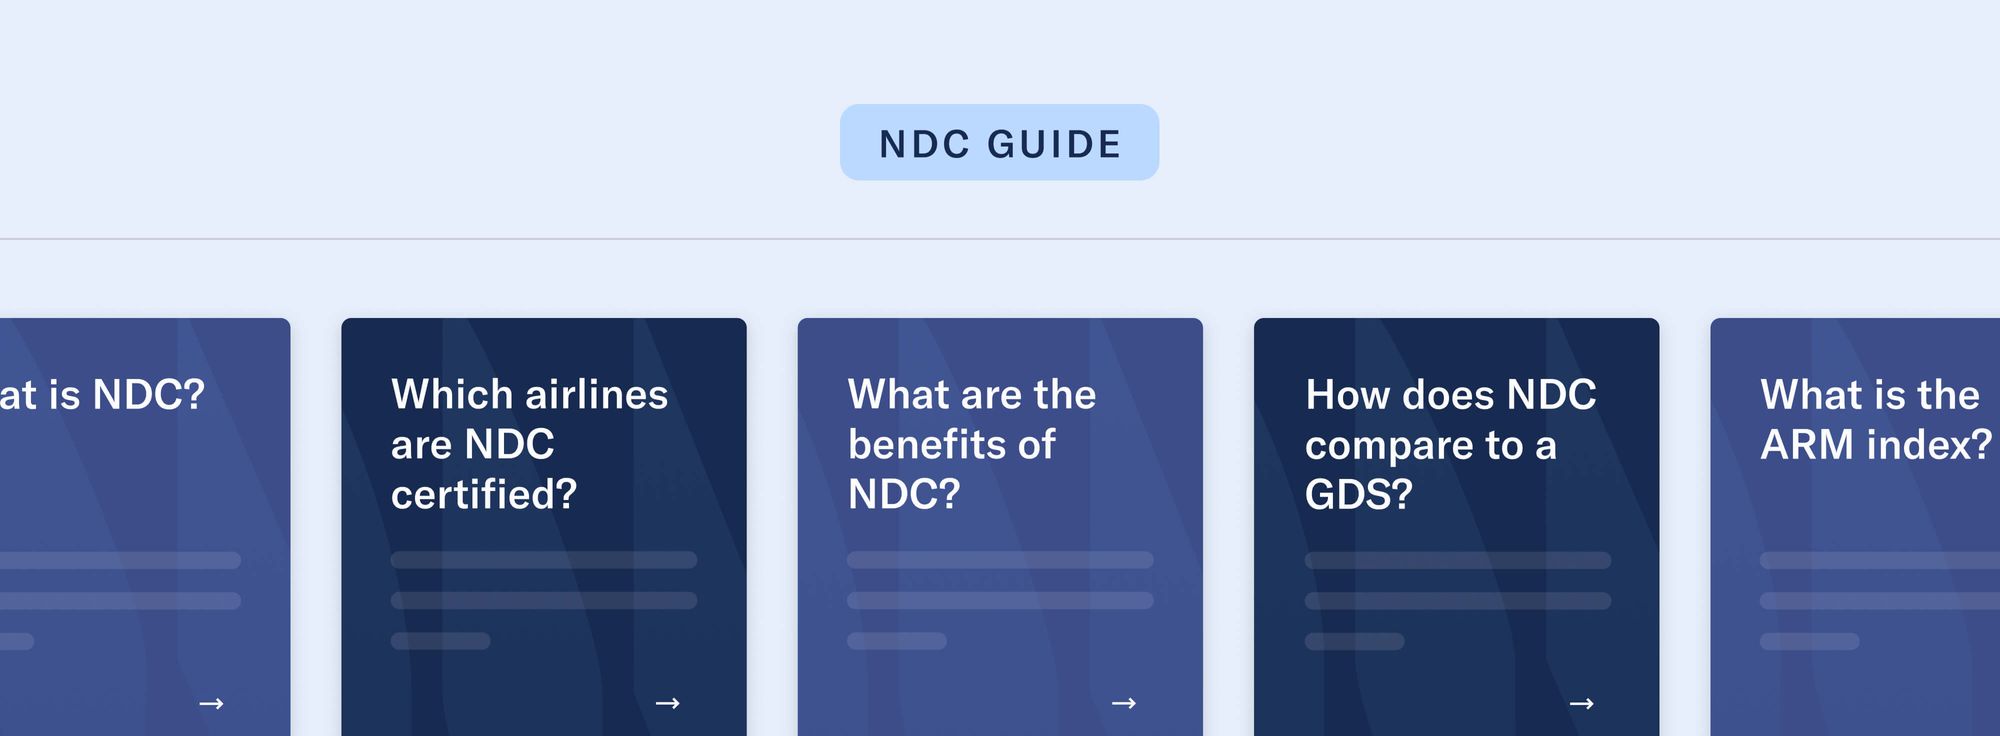 Introducing the complete NDC guide for travel sellers